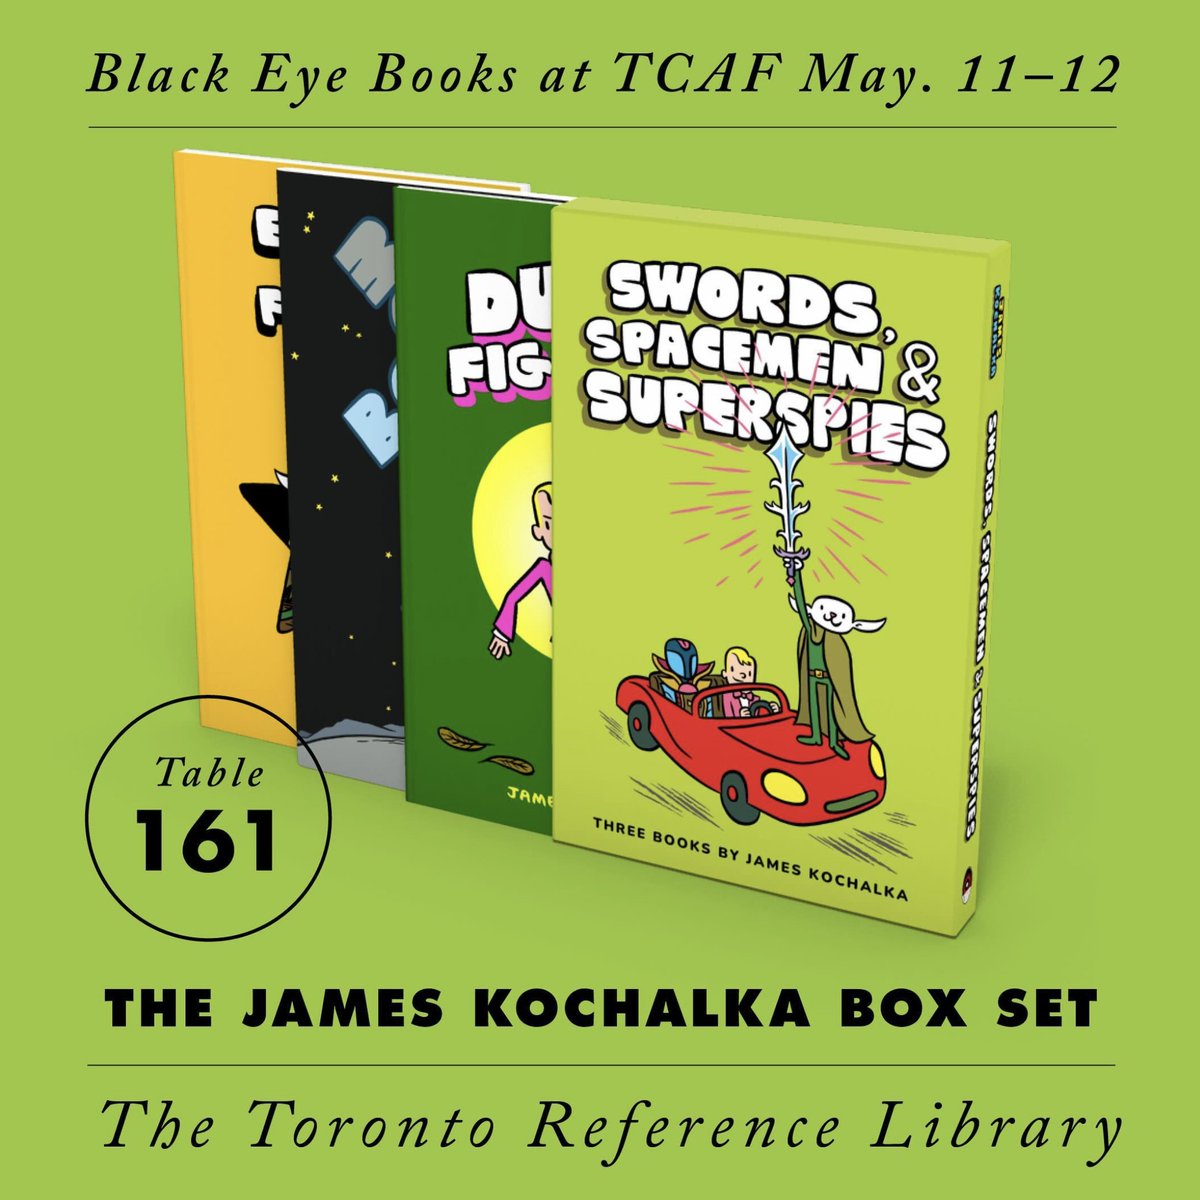 if you are at TCAF @TorontoComics please stop by @blackeyebooks table 161 and pick up my new book Swords, Spacemen & Superspies